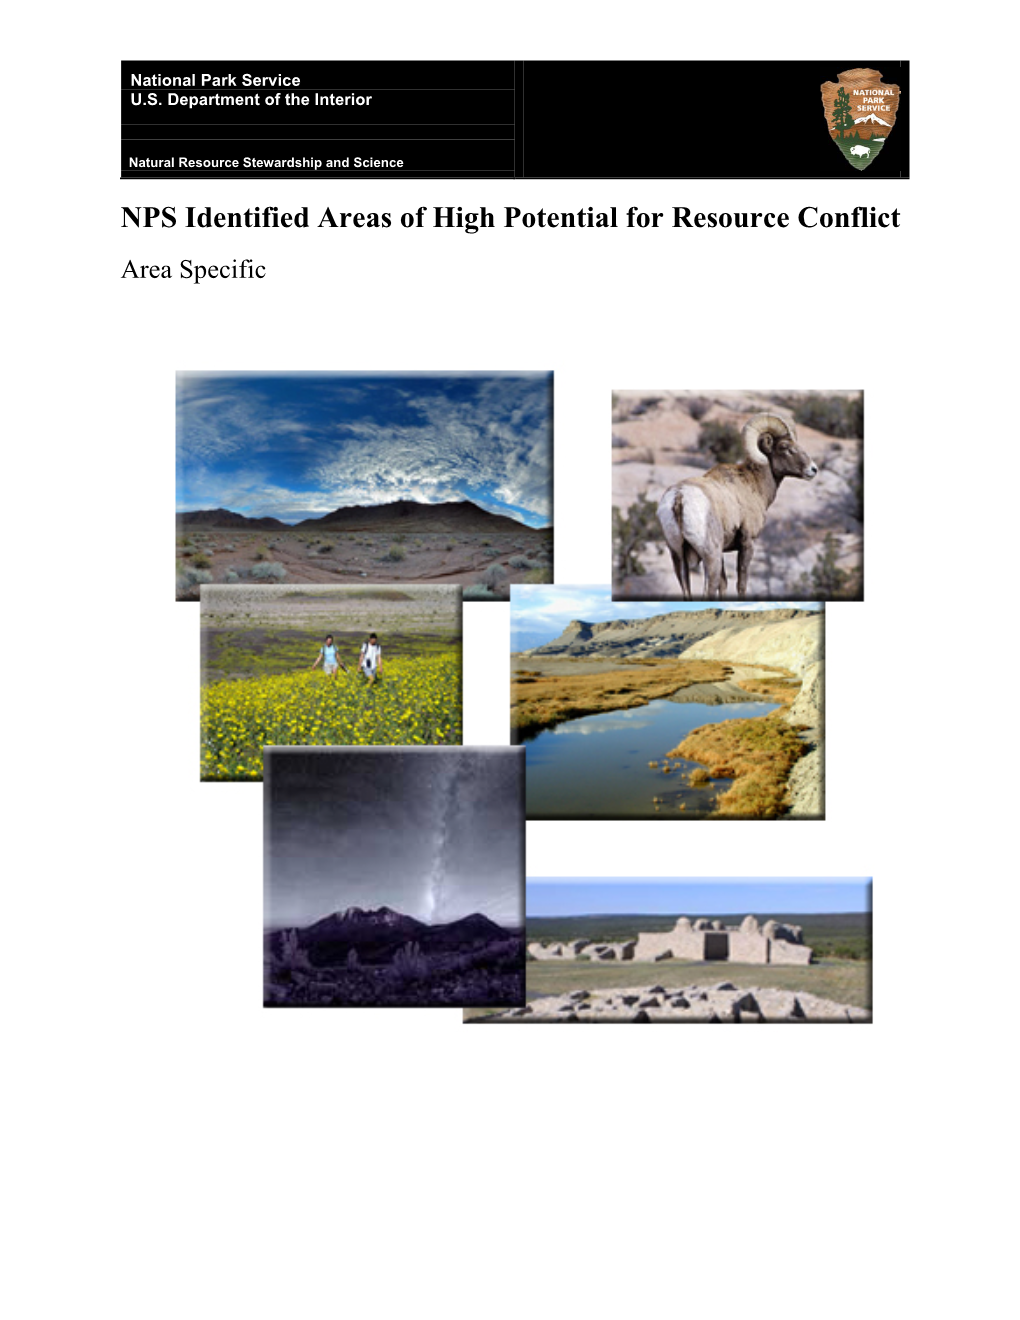 NPS Identified Areas of High Potential for Resource Conflict Area Specific